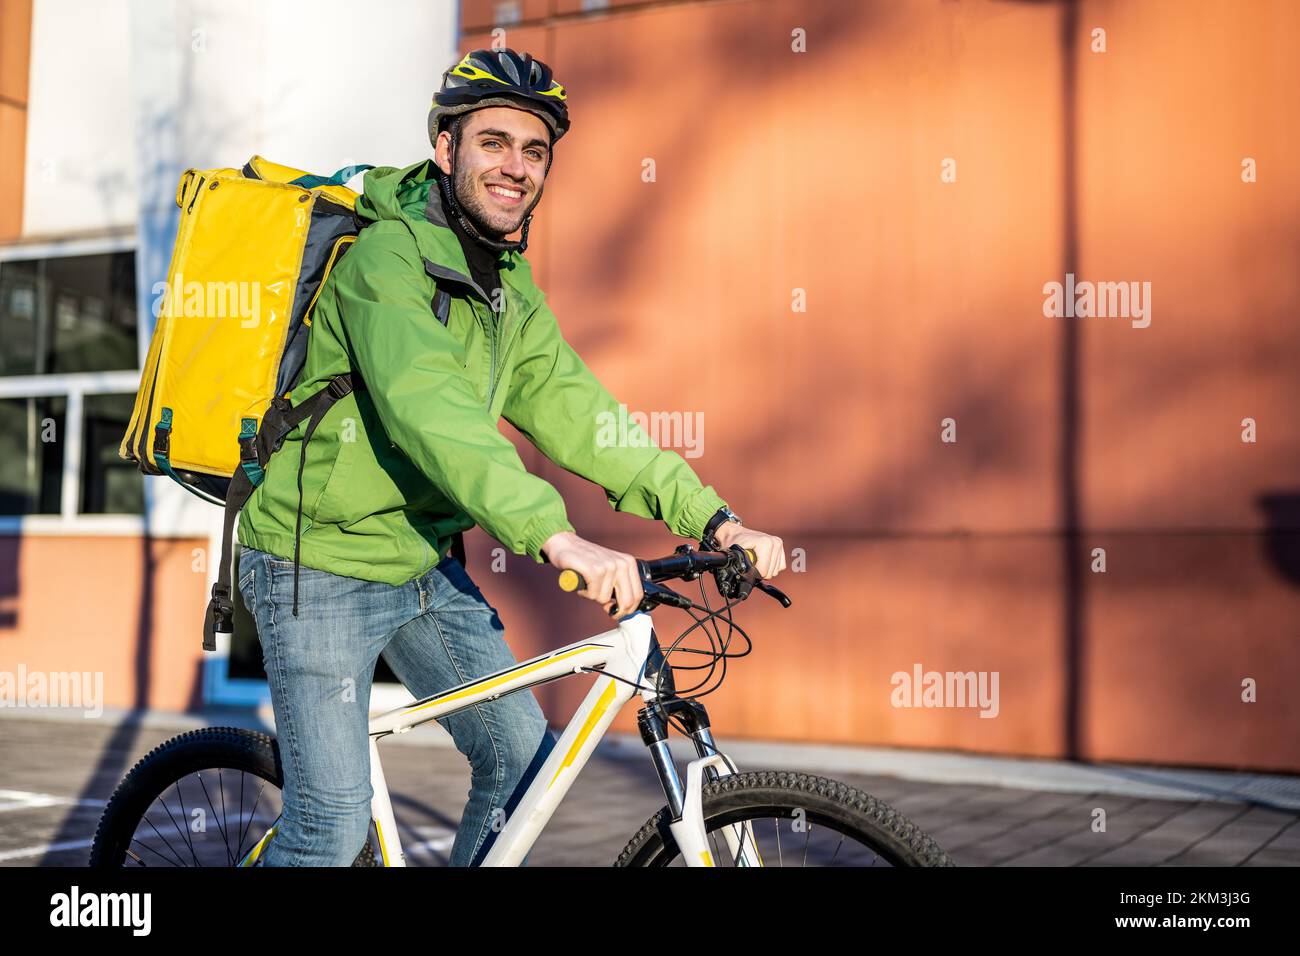 portrait of a smiling fast delivery man on bicycle, food and beverage express delivery service in the city, sustainability way of transportation, envi Stock Photo